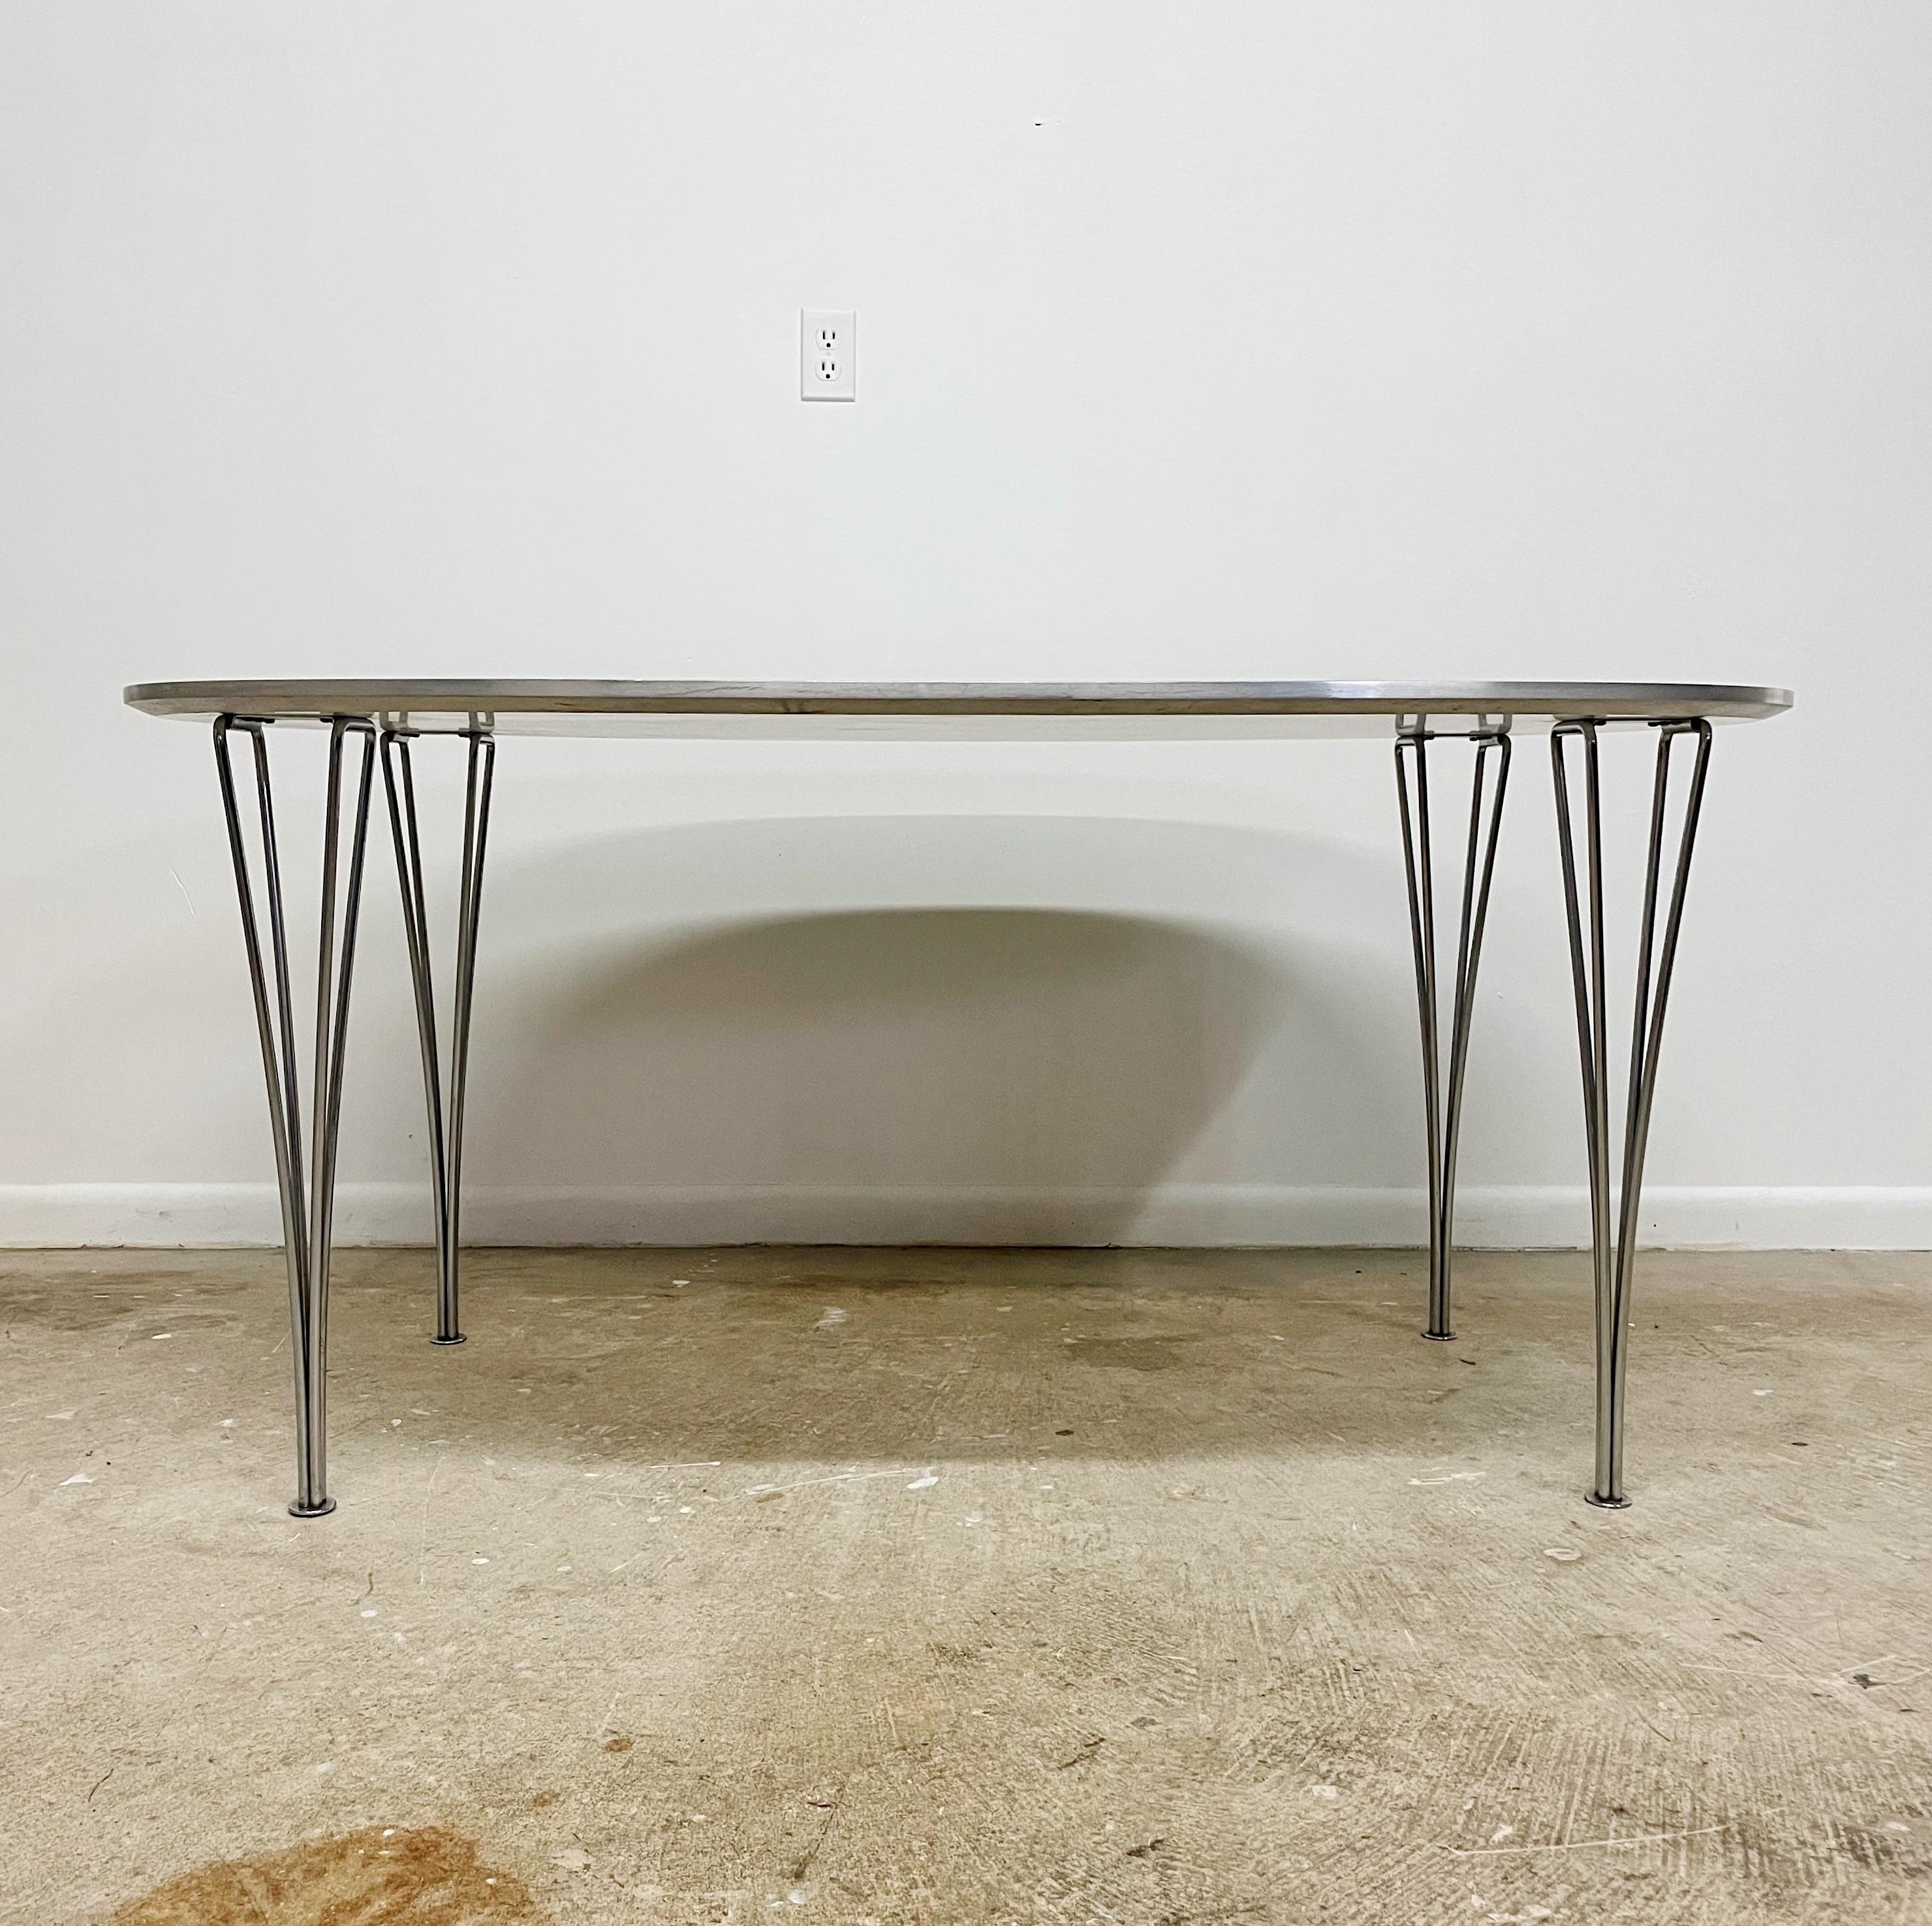 White laminate top Ellipse dining table with chrome plated steel legs by Piet Hein for Fritz Hansen with design collaboration on the table legs from Arne Jacobsen and  Bruno Mathsson.   Original Fritz Hansen, Made in Denmark, 1986 furniture makers